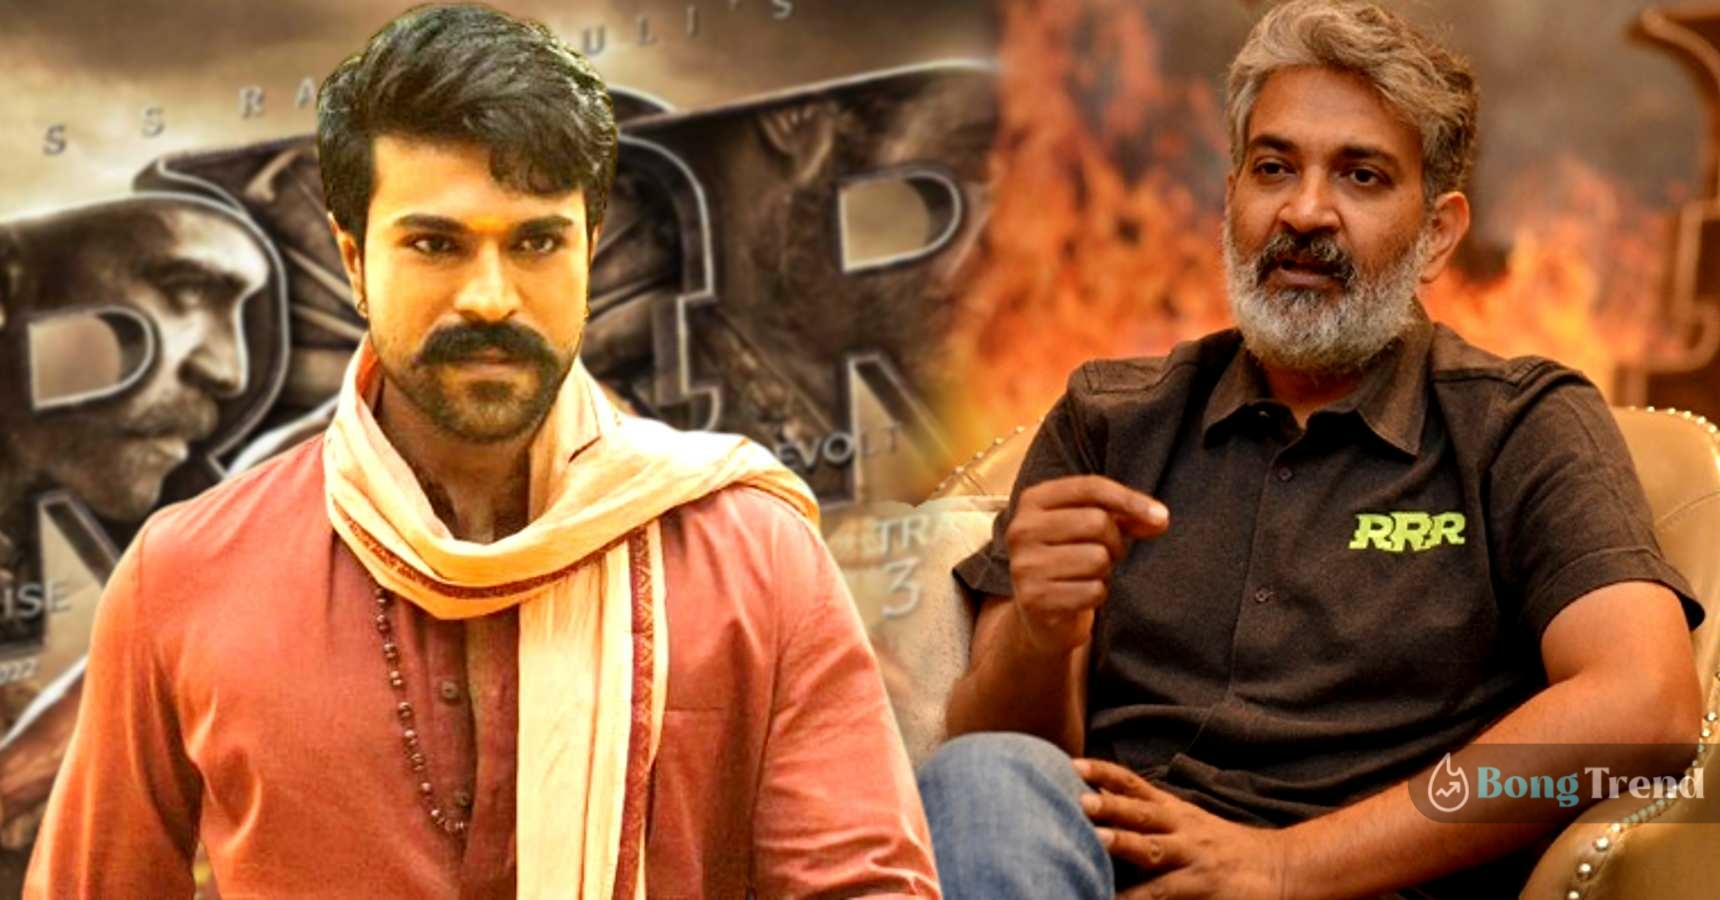 S S Rajamouli says not Ram Charan was not approched first for RRR movie